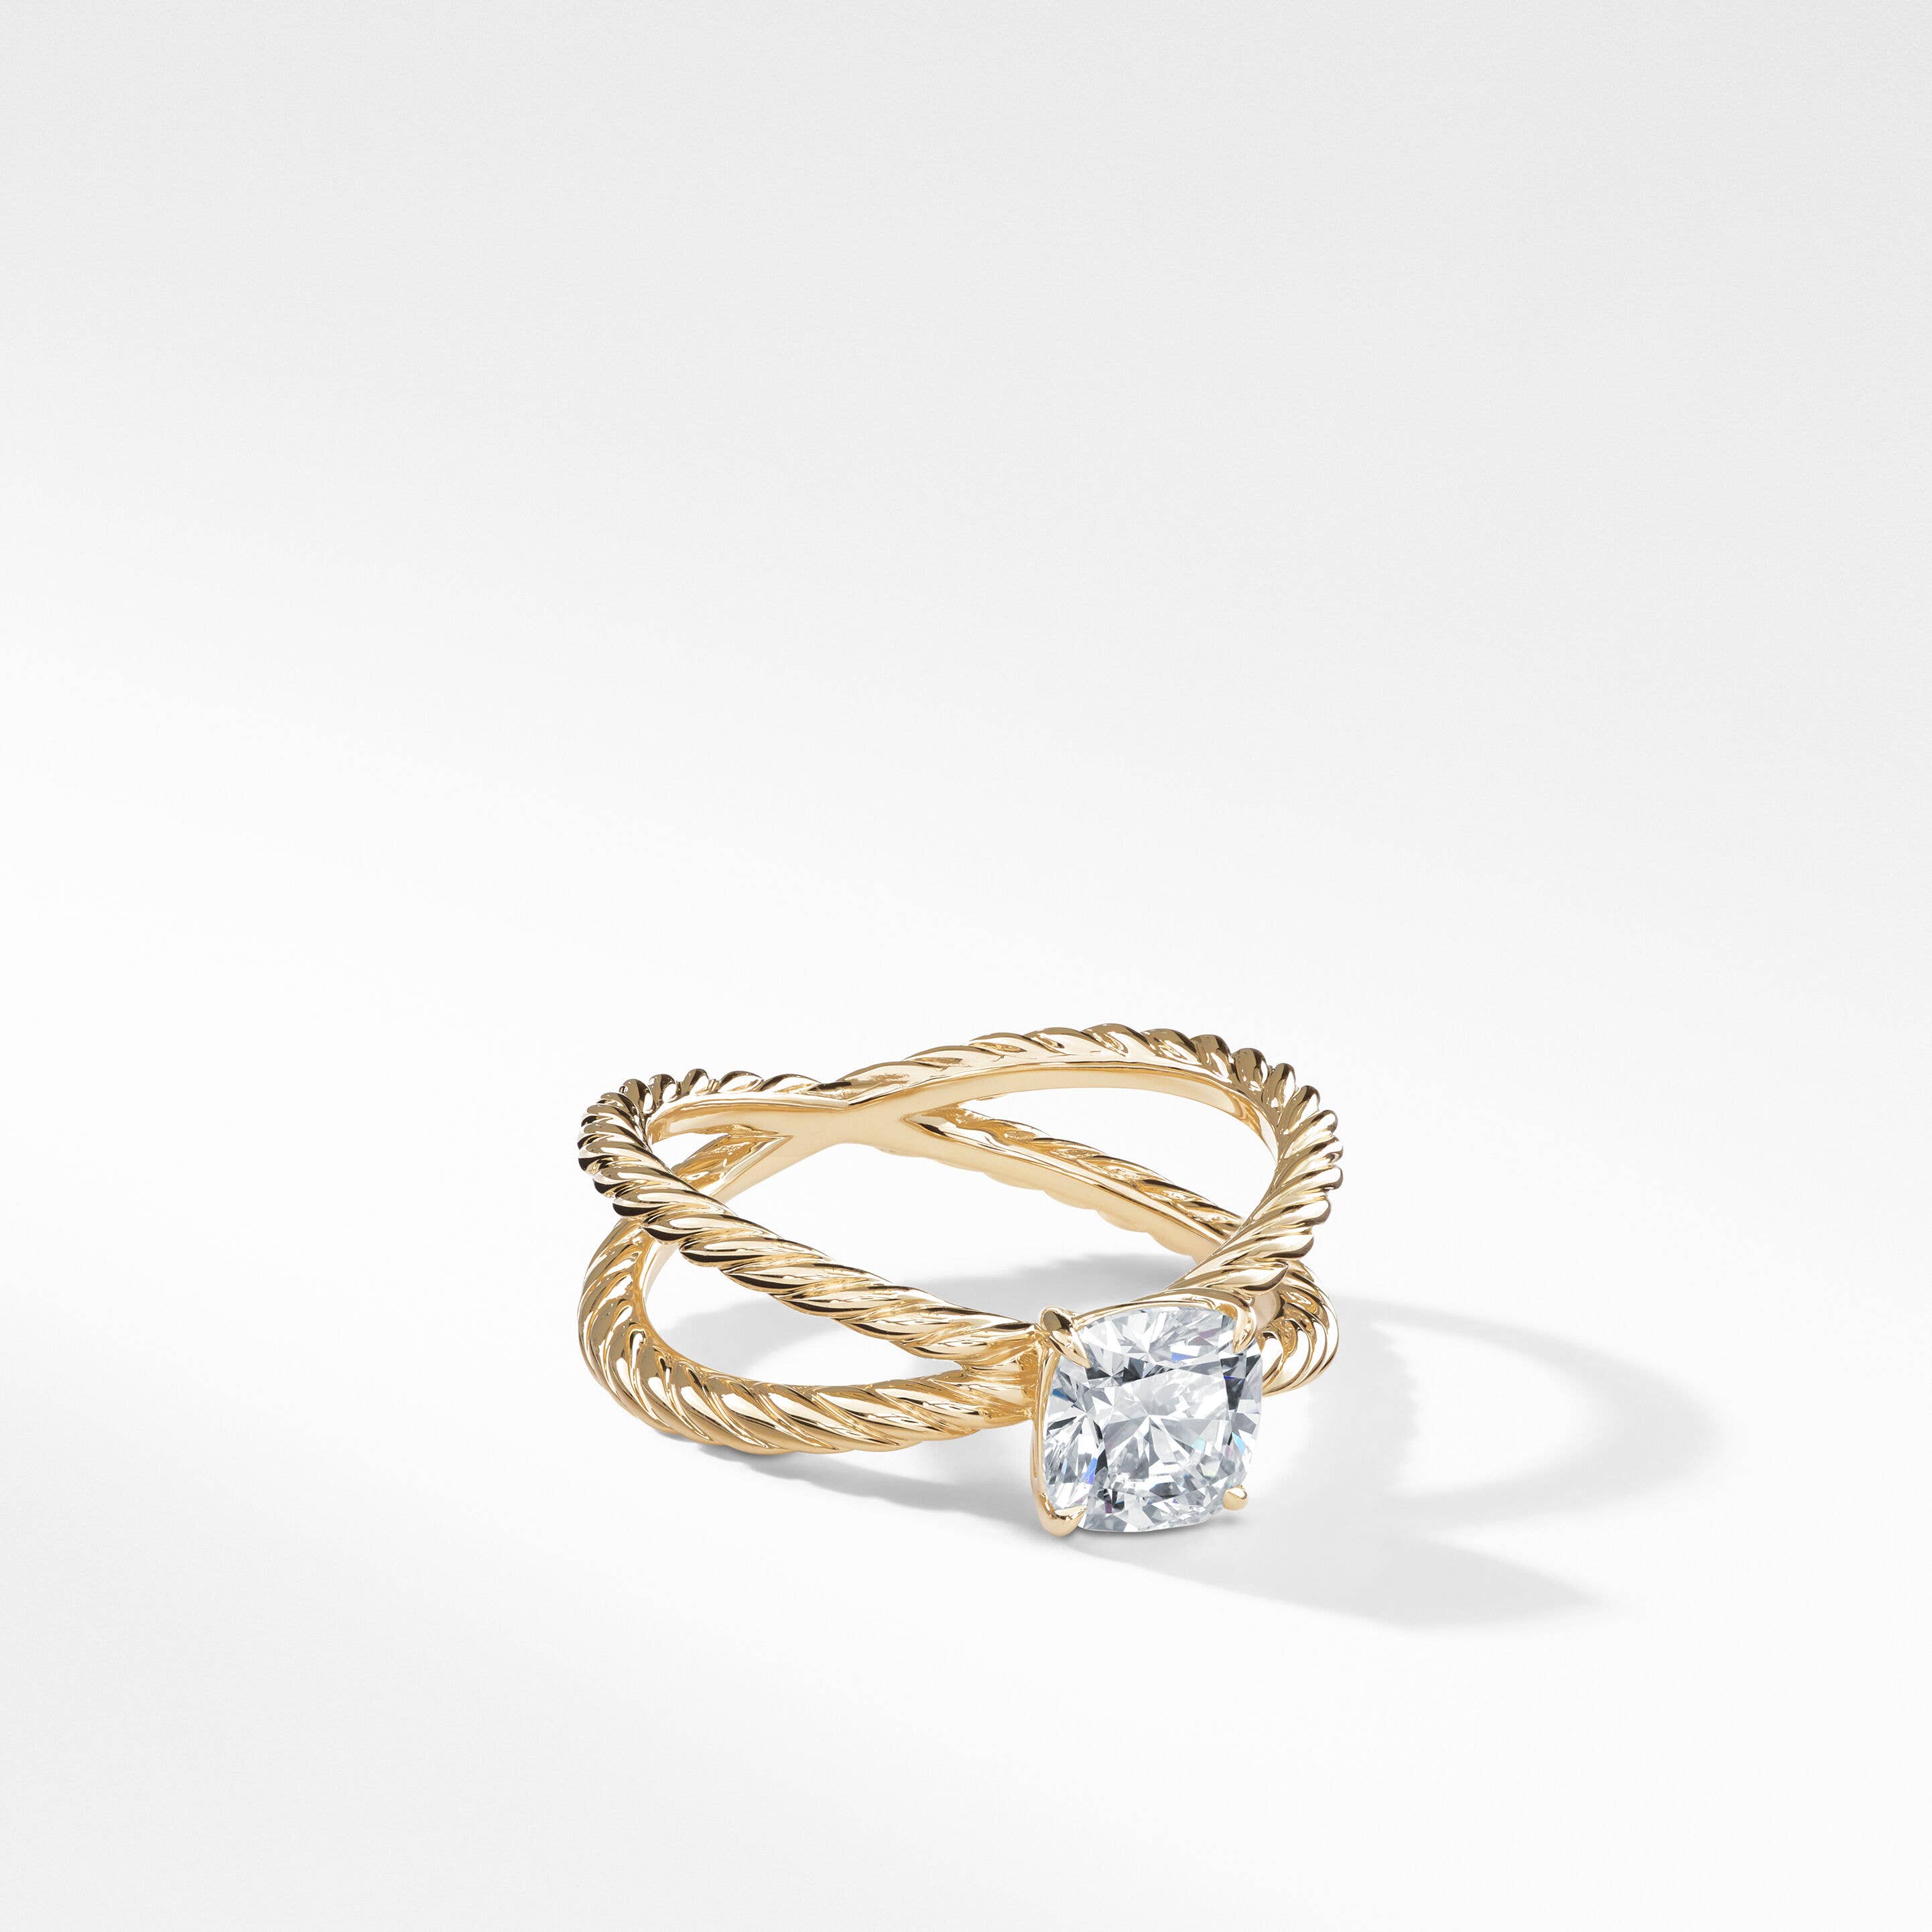 DY Crossover® Petite Engagement Ring in 18K Yellow Gold, Cushion